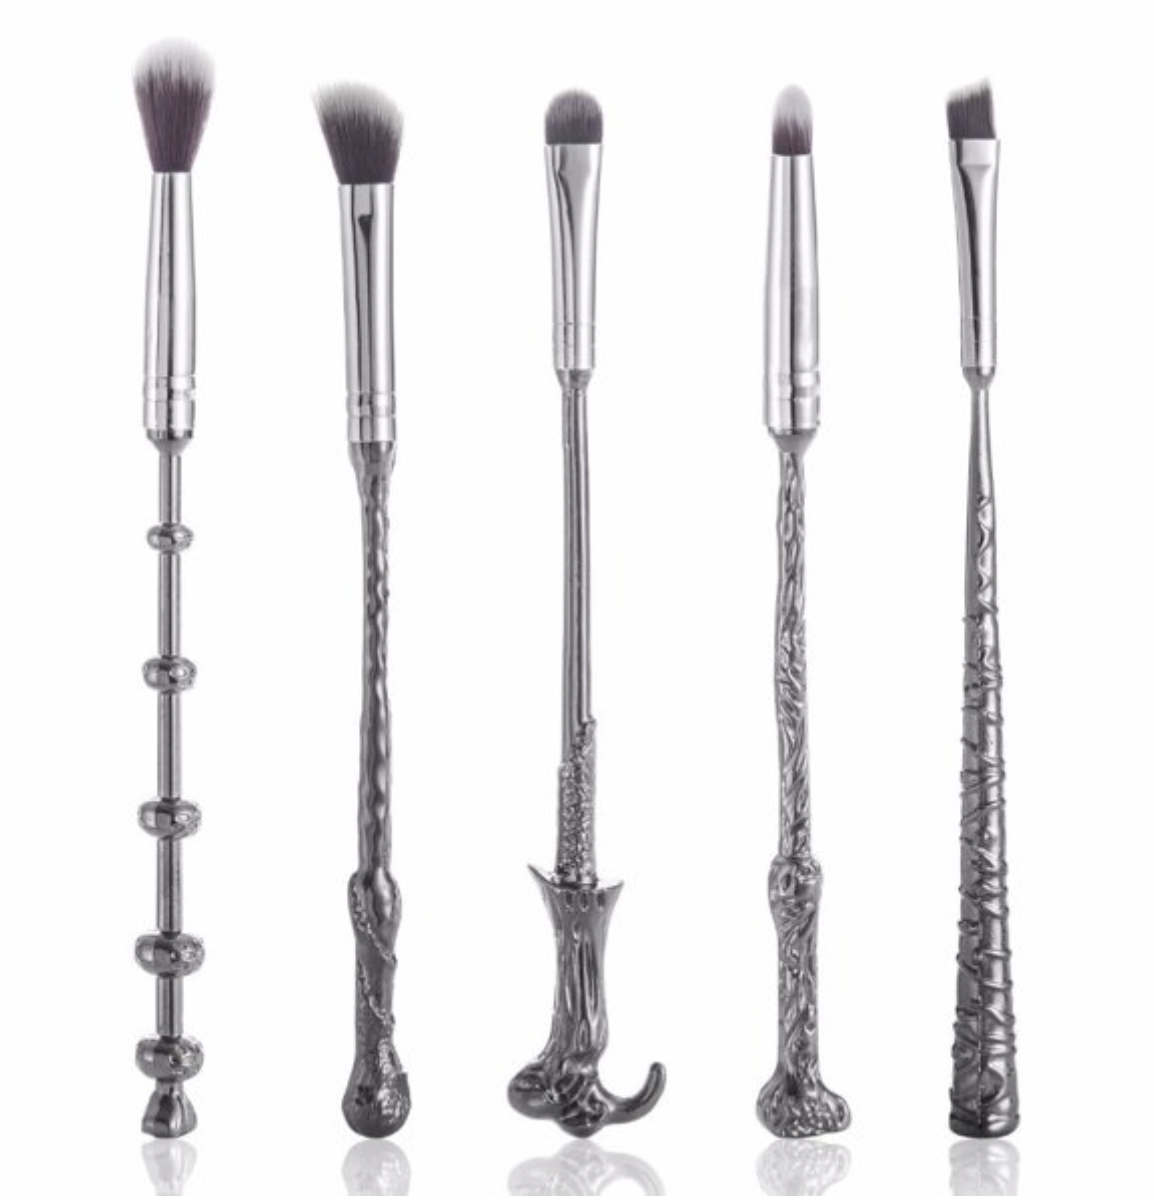 harry-potter-gifts-makeup-brushes